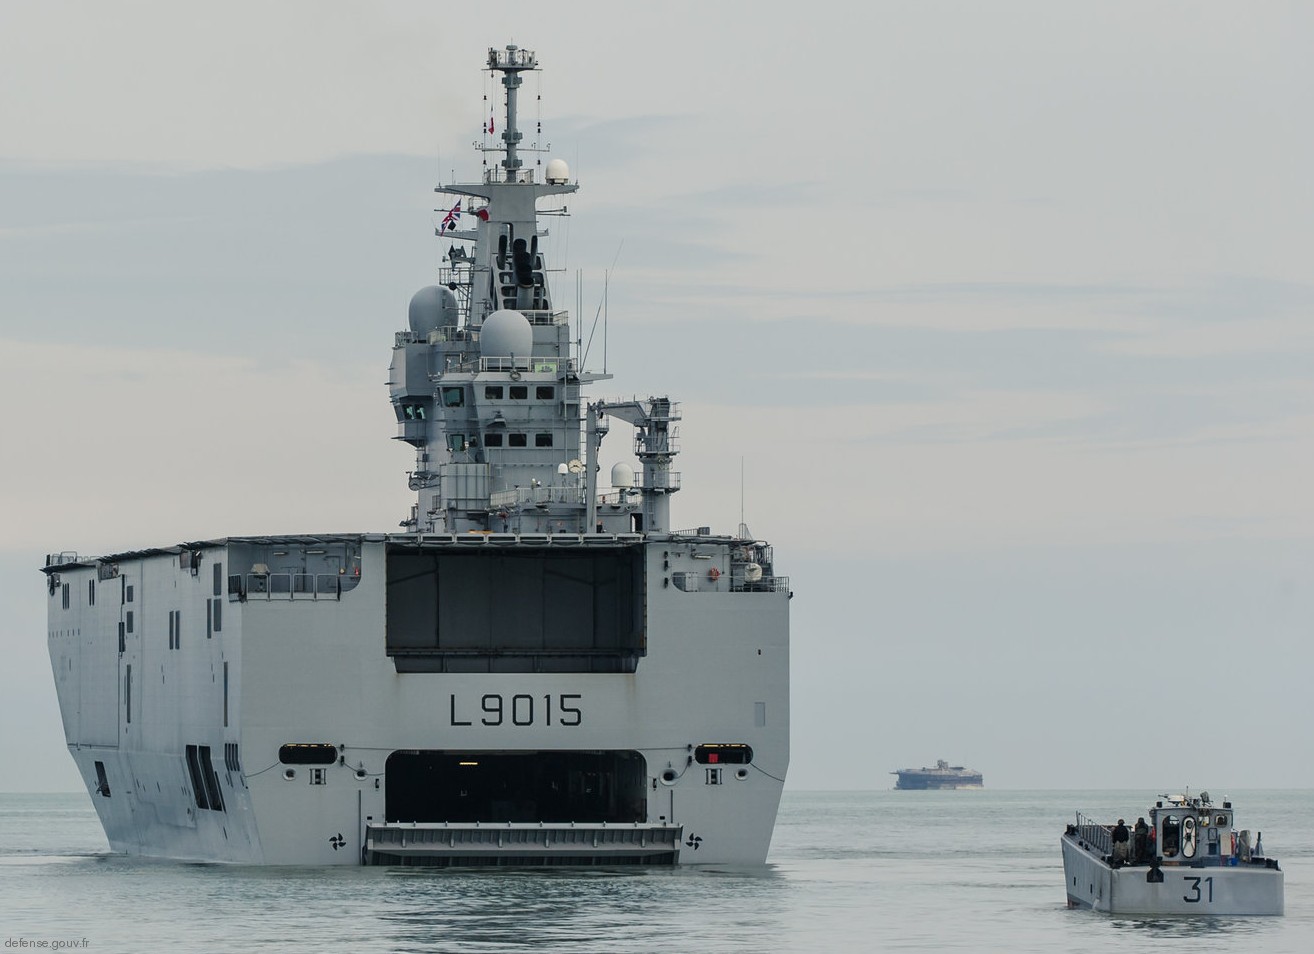 l-9015 fs dixmude mistral class amphibious assault command ship bpc french navy marine nationale 16 well deck